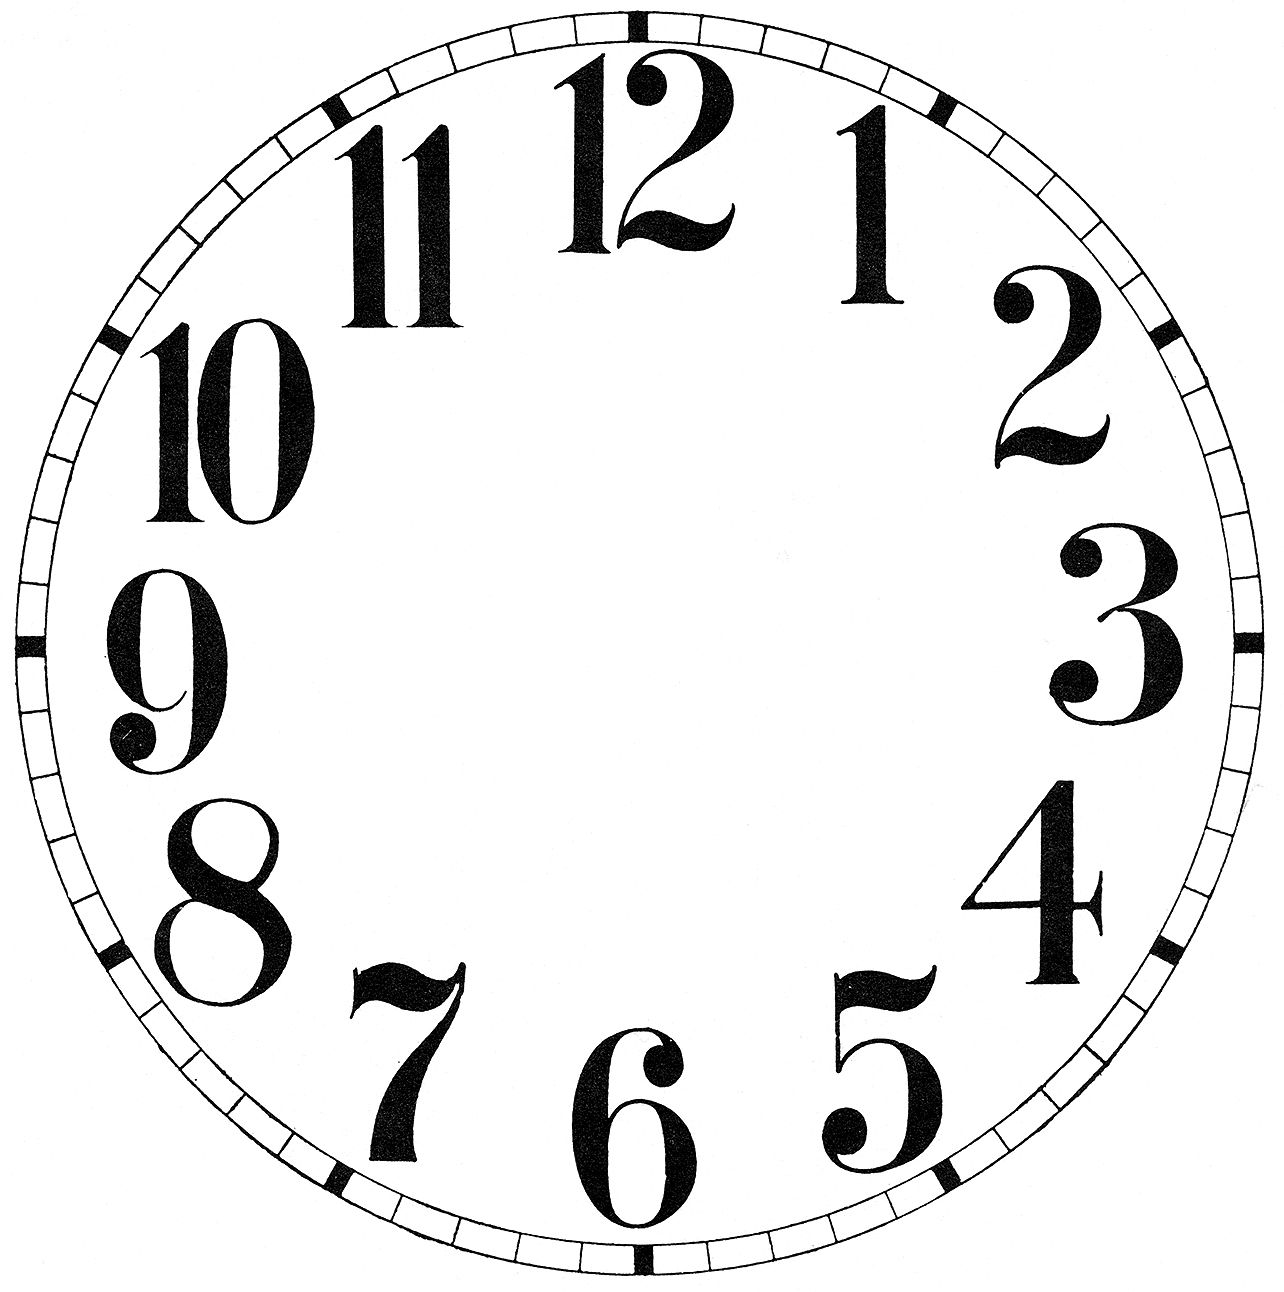 11 Clock Face Images.